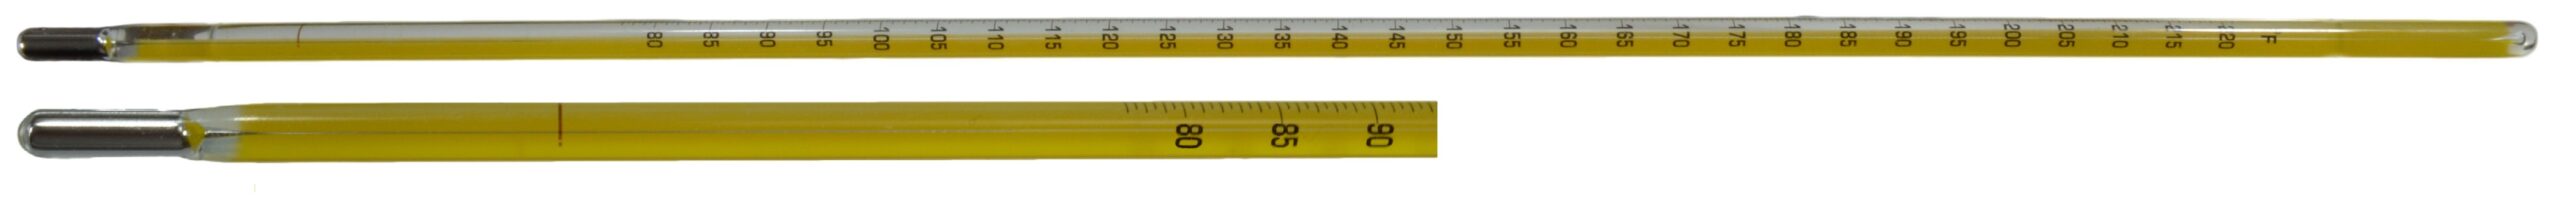 General Laboratory Thermometers images